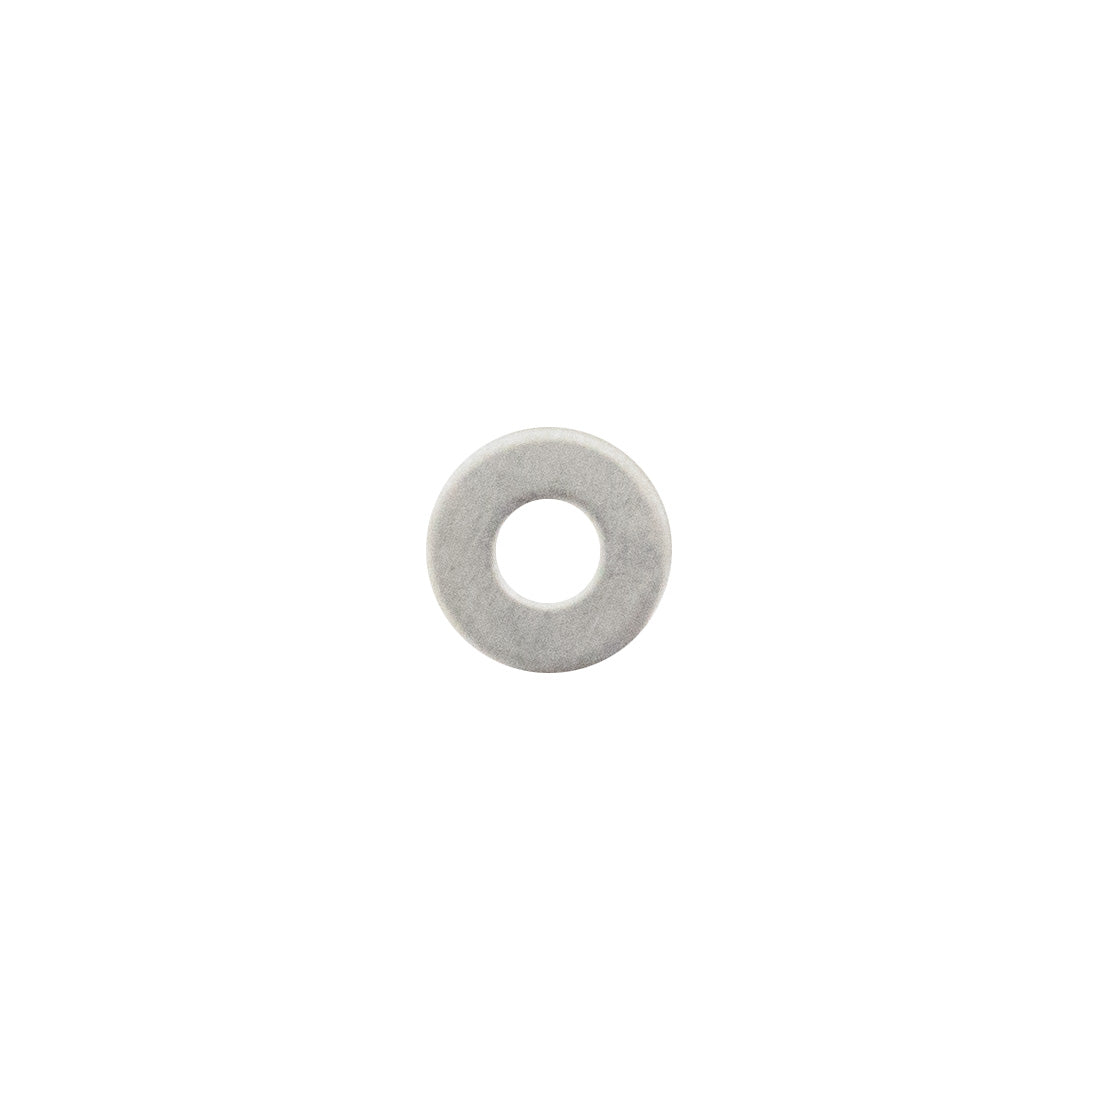 XERO Replacement Wing Nuts for Bronze Wool Pad Holder - Washer Top View